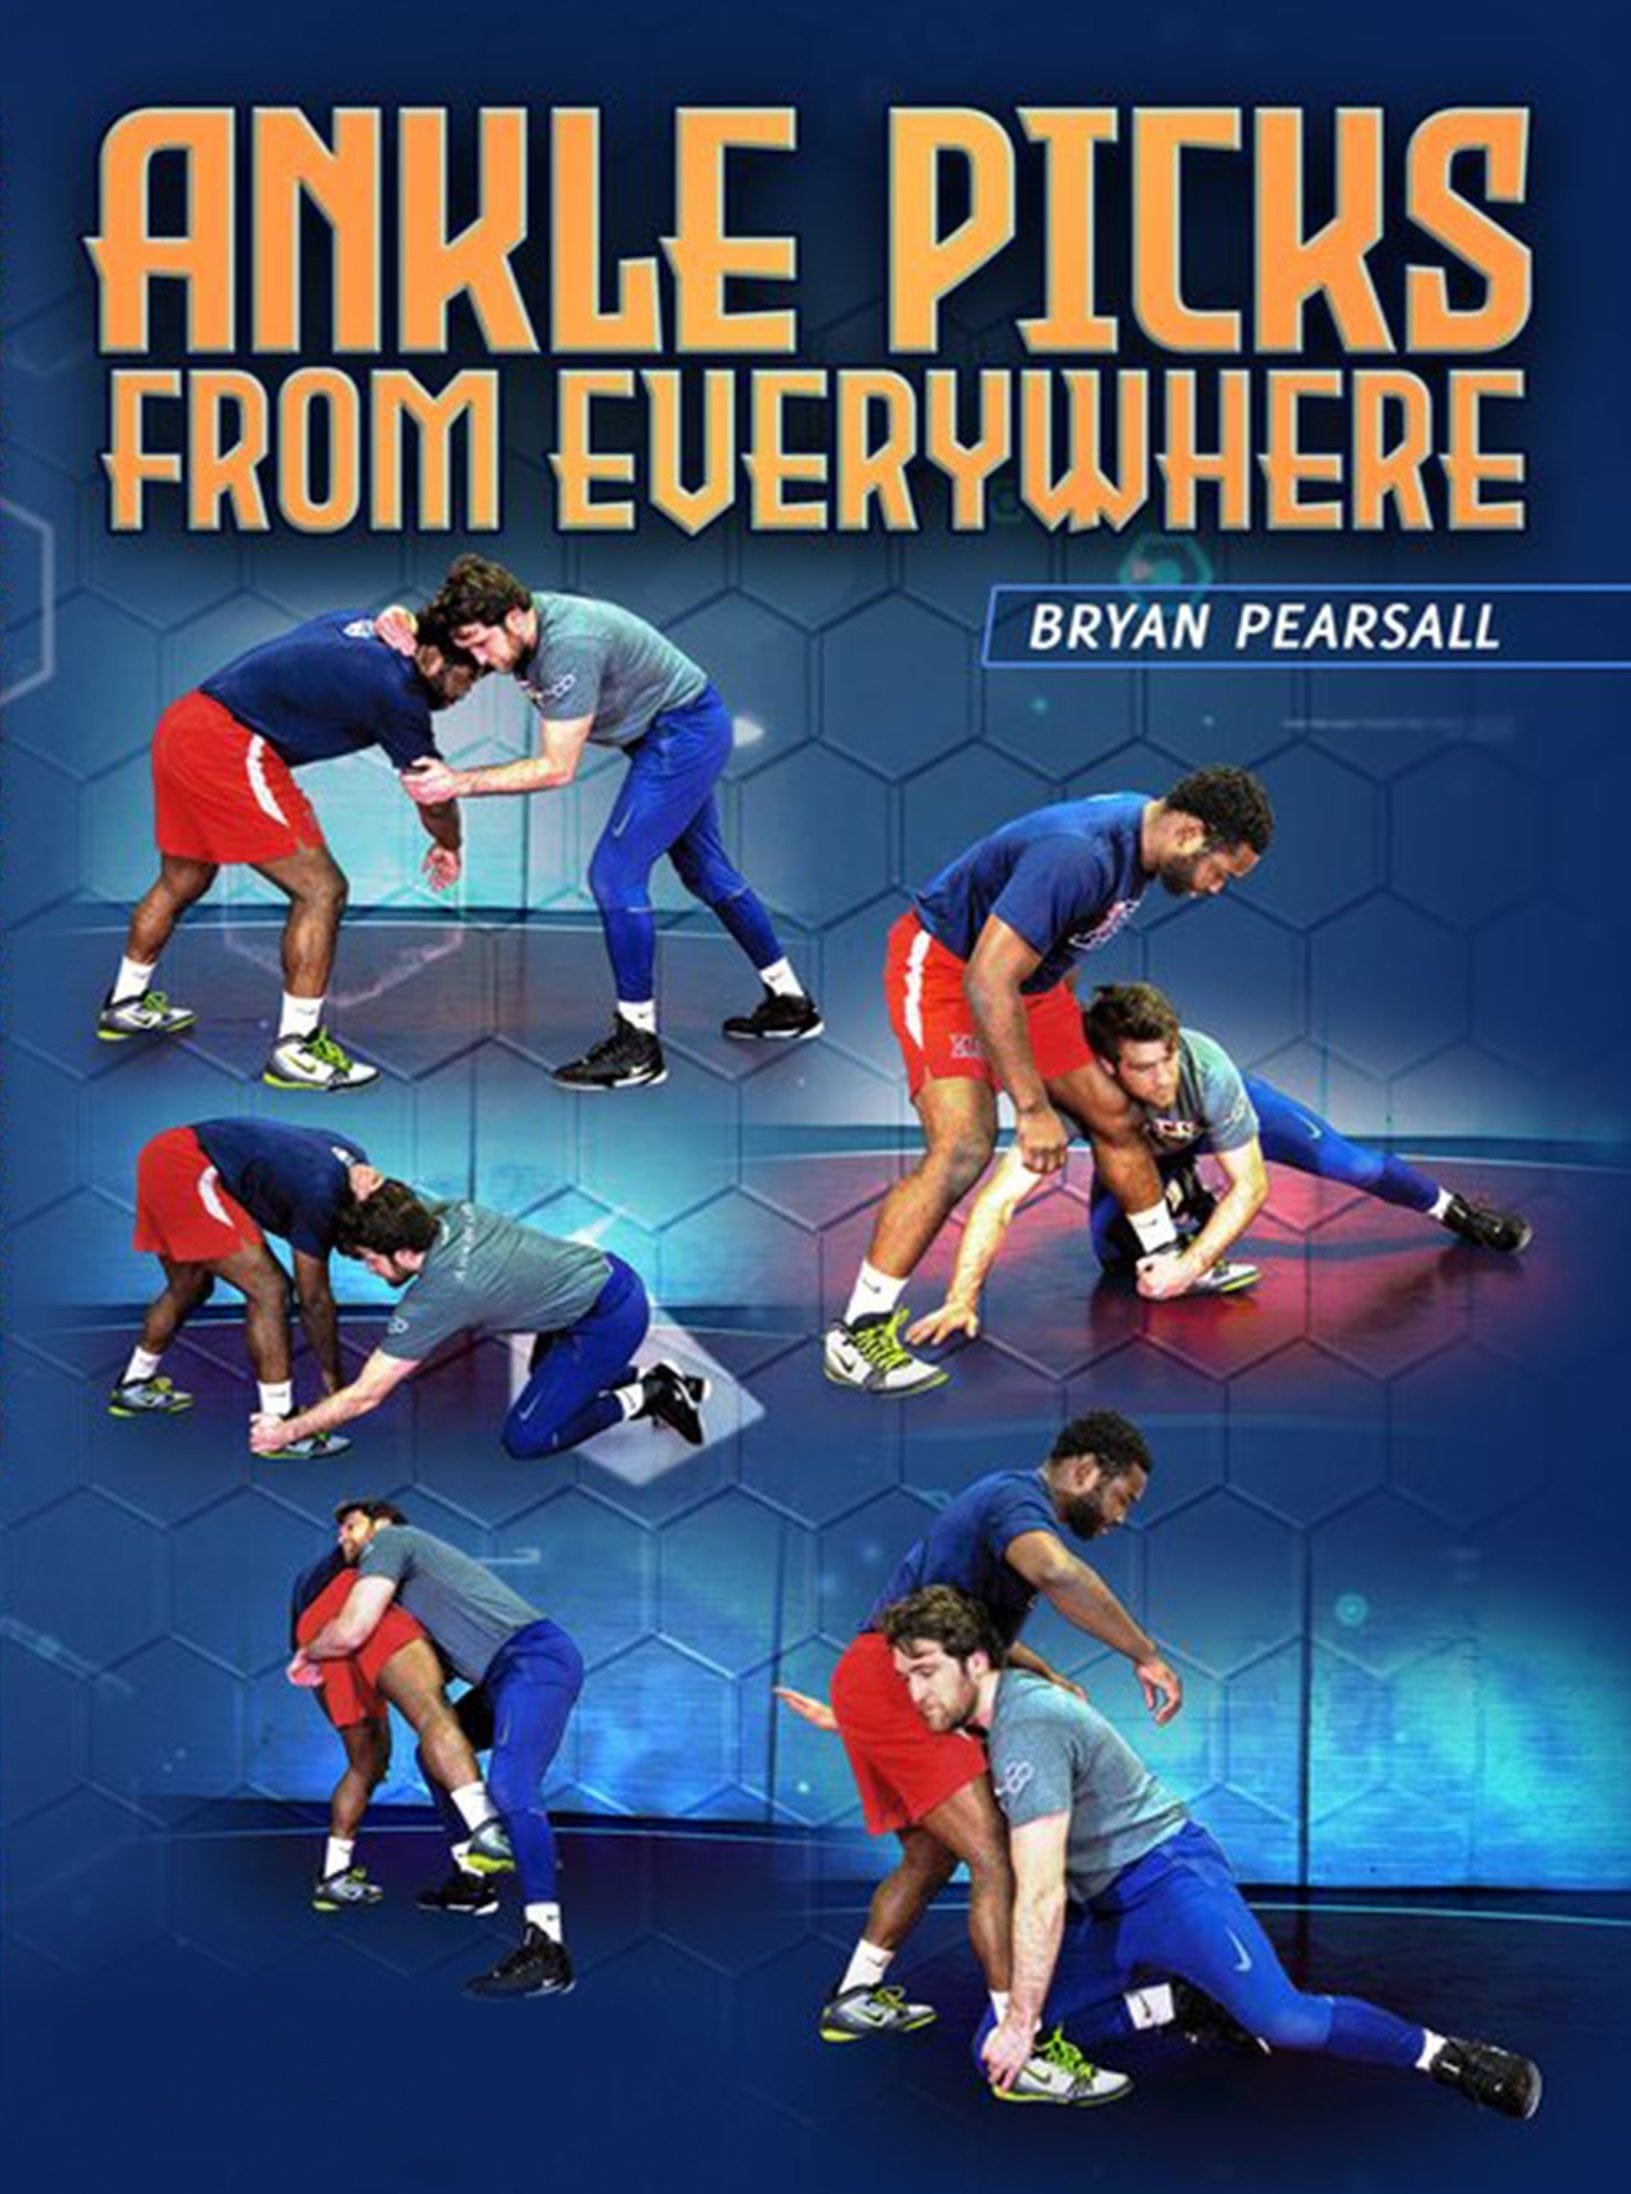 Ankle Picks From Everywhere by Bryan Pearsall - Fanatic Wrestling